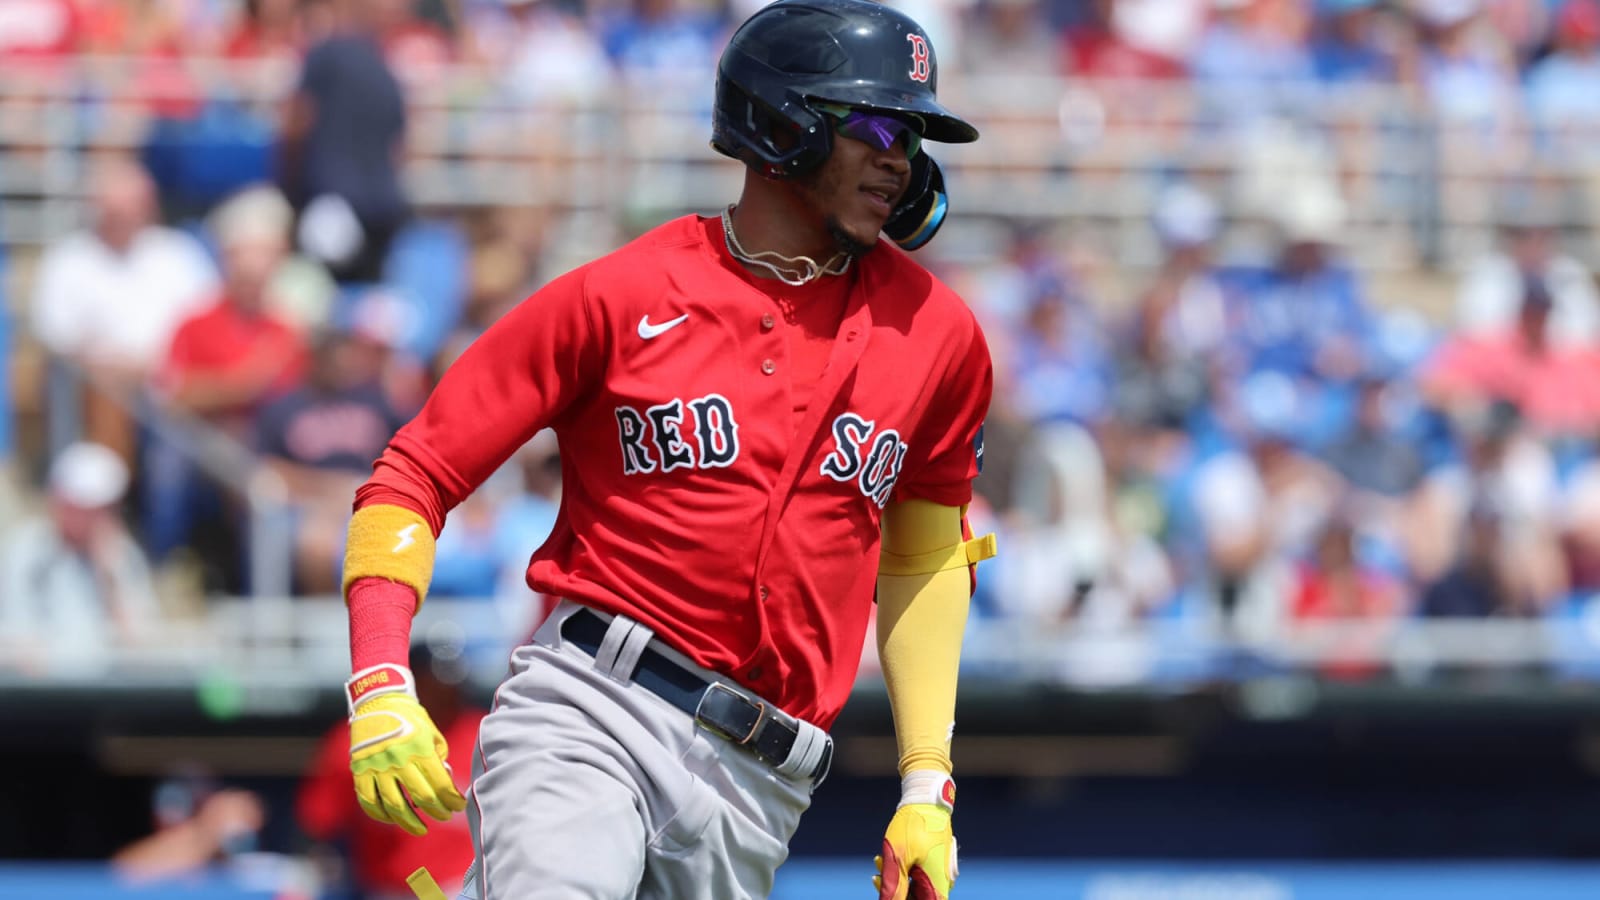 Top Red Sox prospect Miguel Bleis to undergo season-ending shoulder surgery